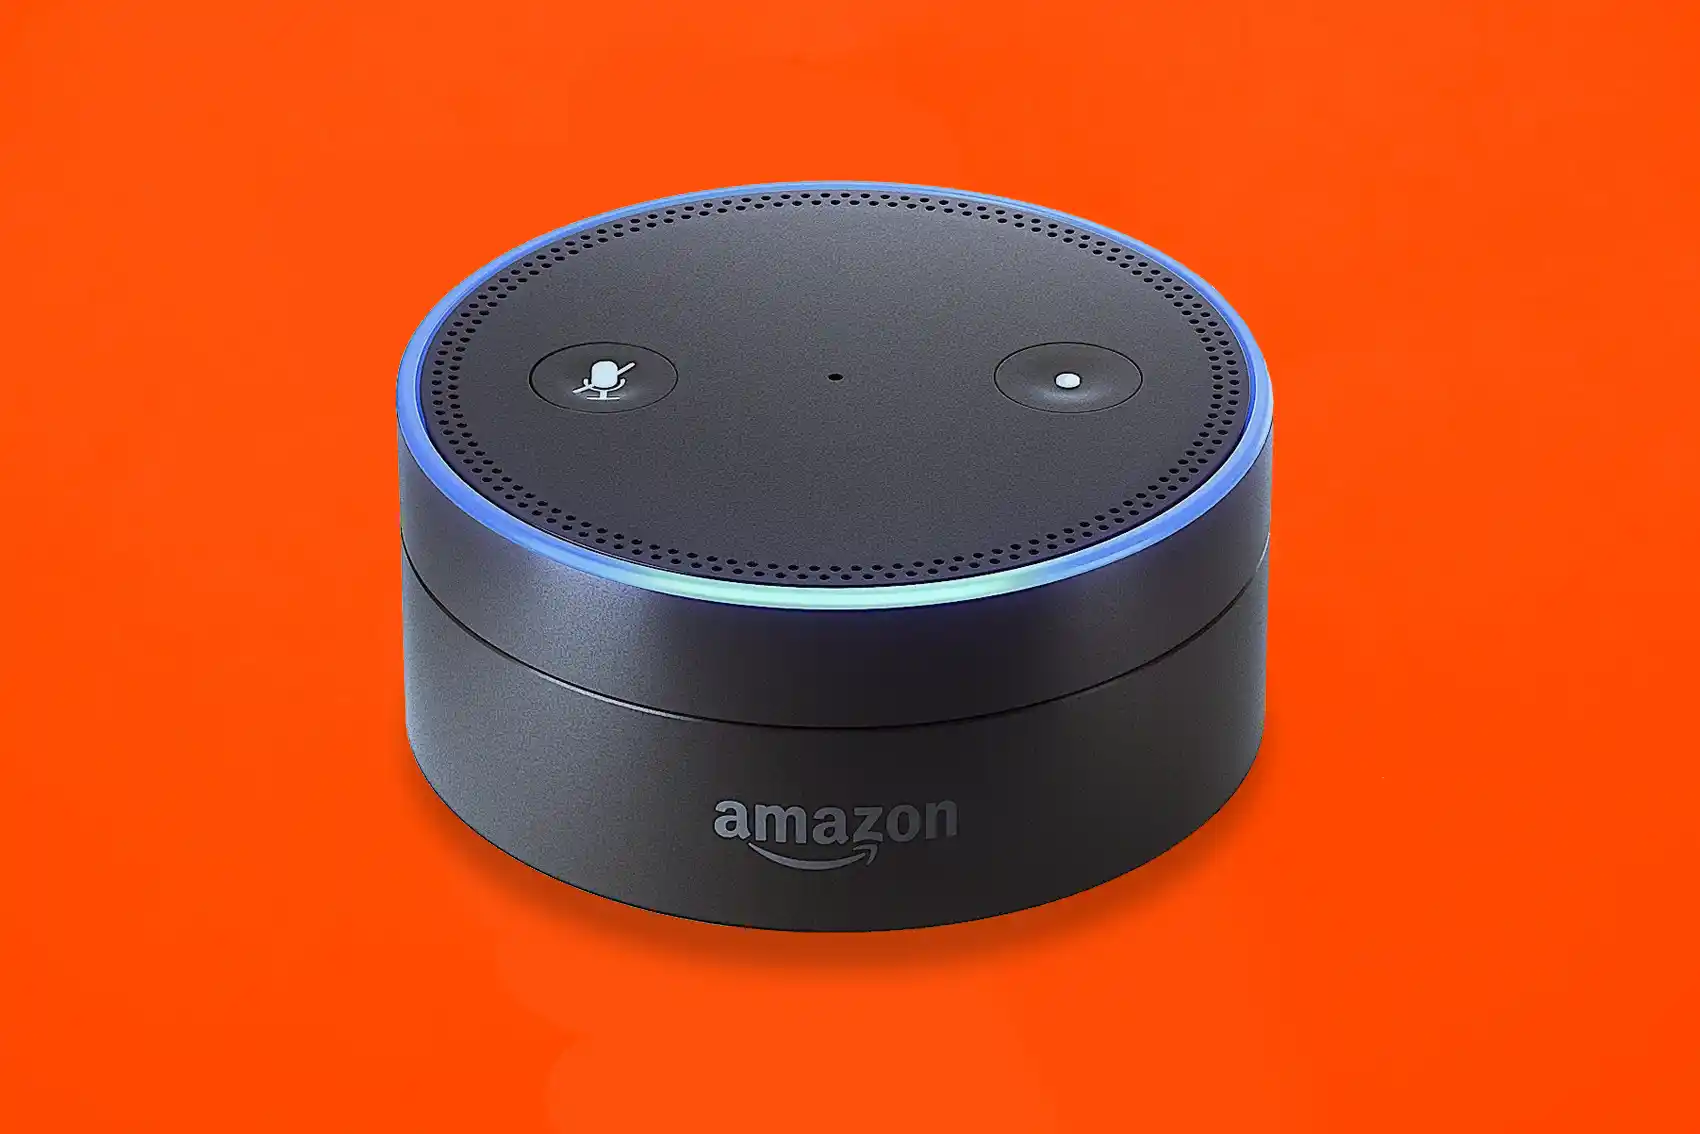 Is Alexa Free With Prime 1.0